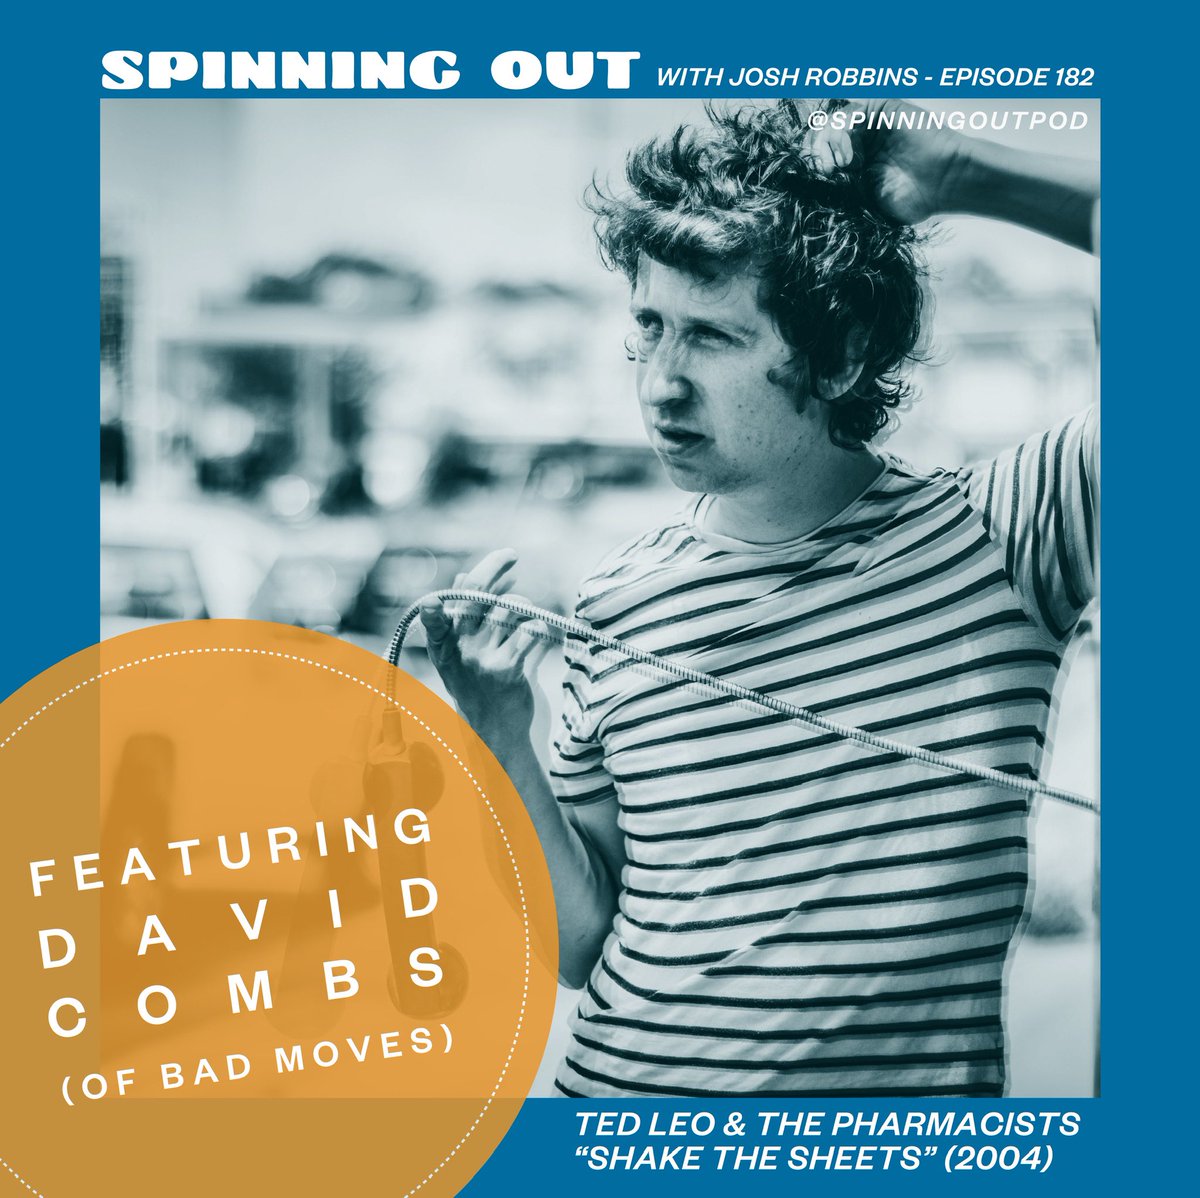 Episode 182 : This week on the pod we're joined by David Combs of Bad Moves & also of Dim Wizard. We're talking about Ted Leo & the Pharmacists' album, “Shake the Sheets.” We chat a lot about growing up in DC, the meaning of lyrics & politics in music. linktr.ee/Spinningoutpod